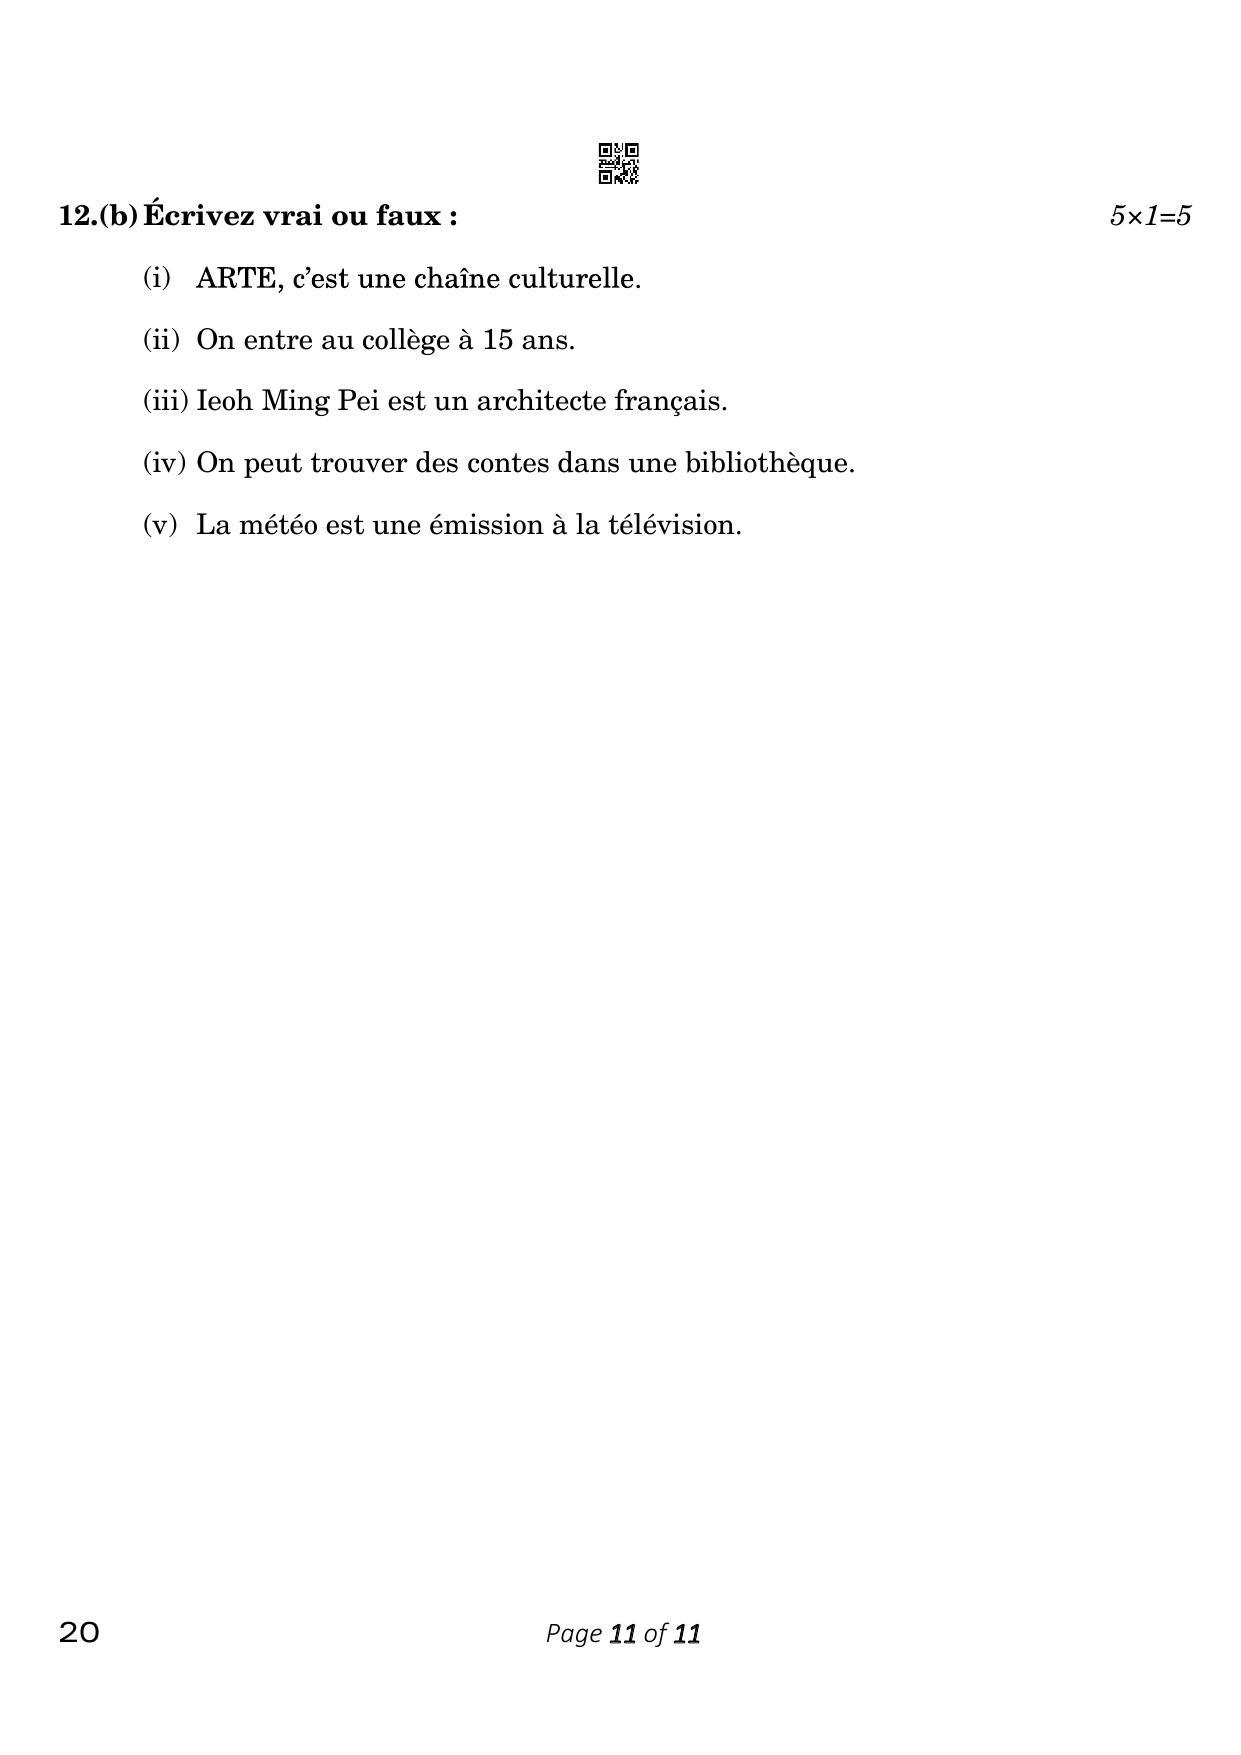 CBSE Class 10 French (Compartment) 2023 Question Paper - Page 11